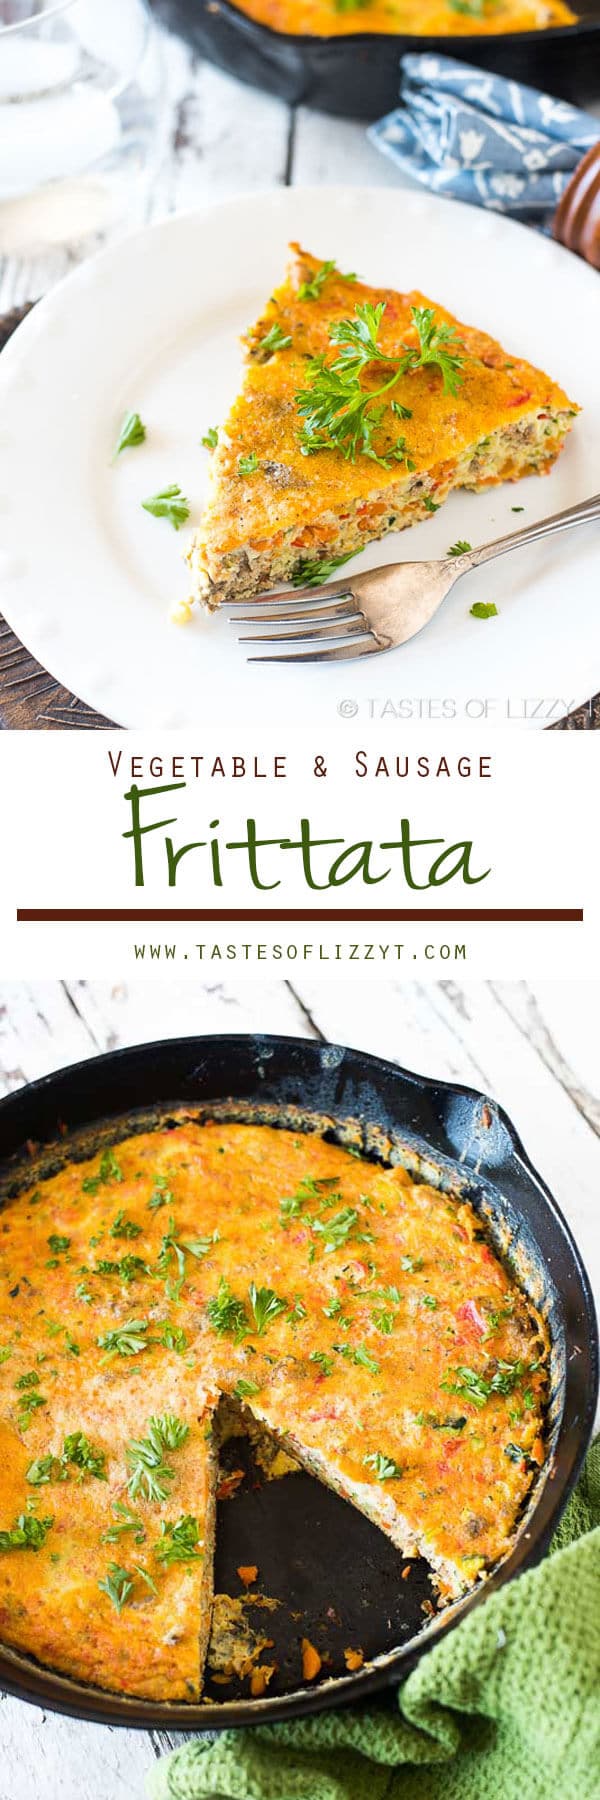 Vegetable and Sausage Frittata {Hints on how to make a fluffy egg frittata}